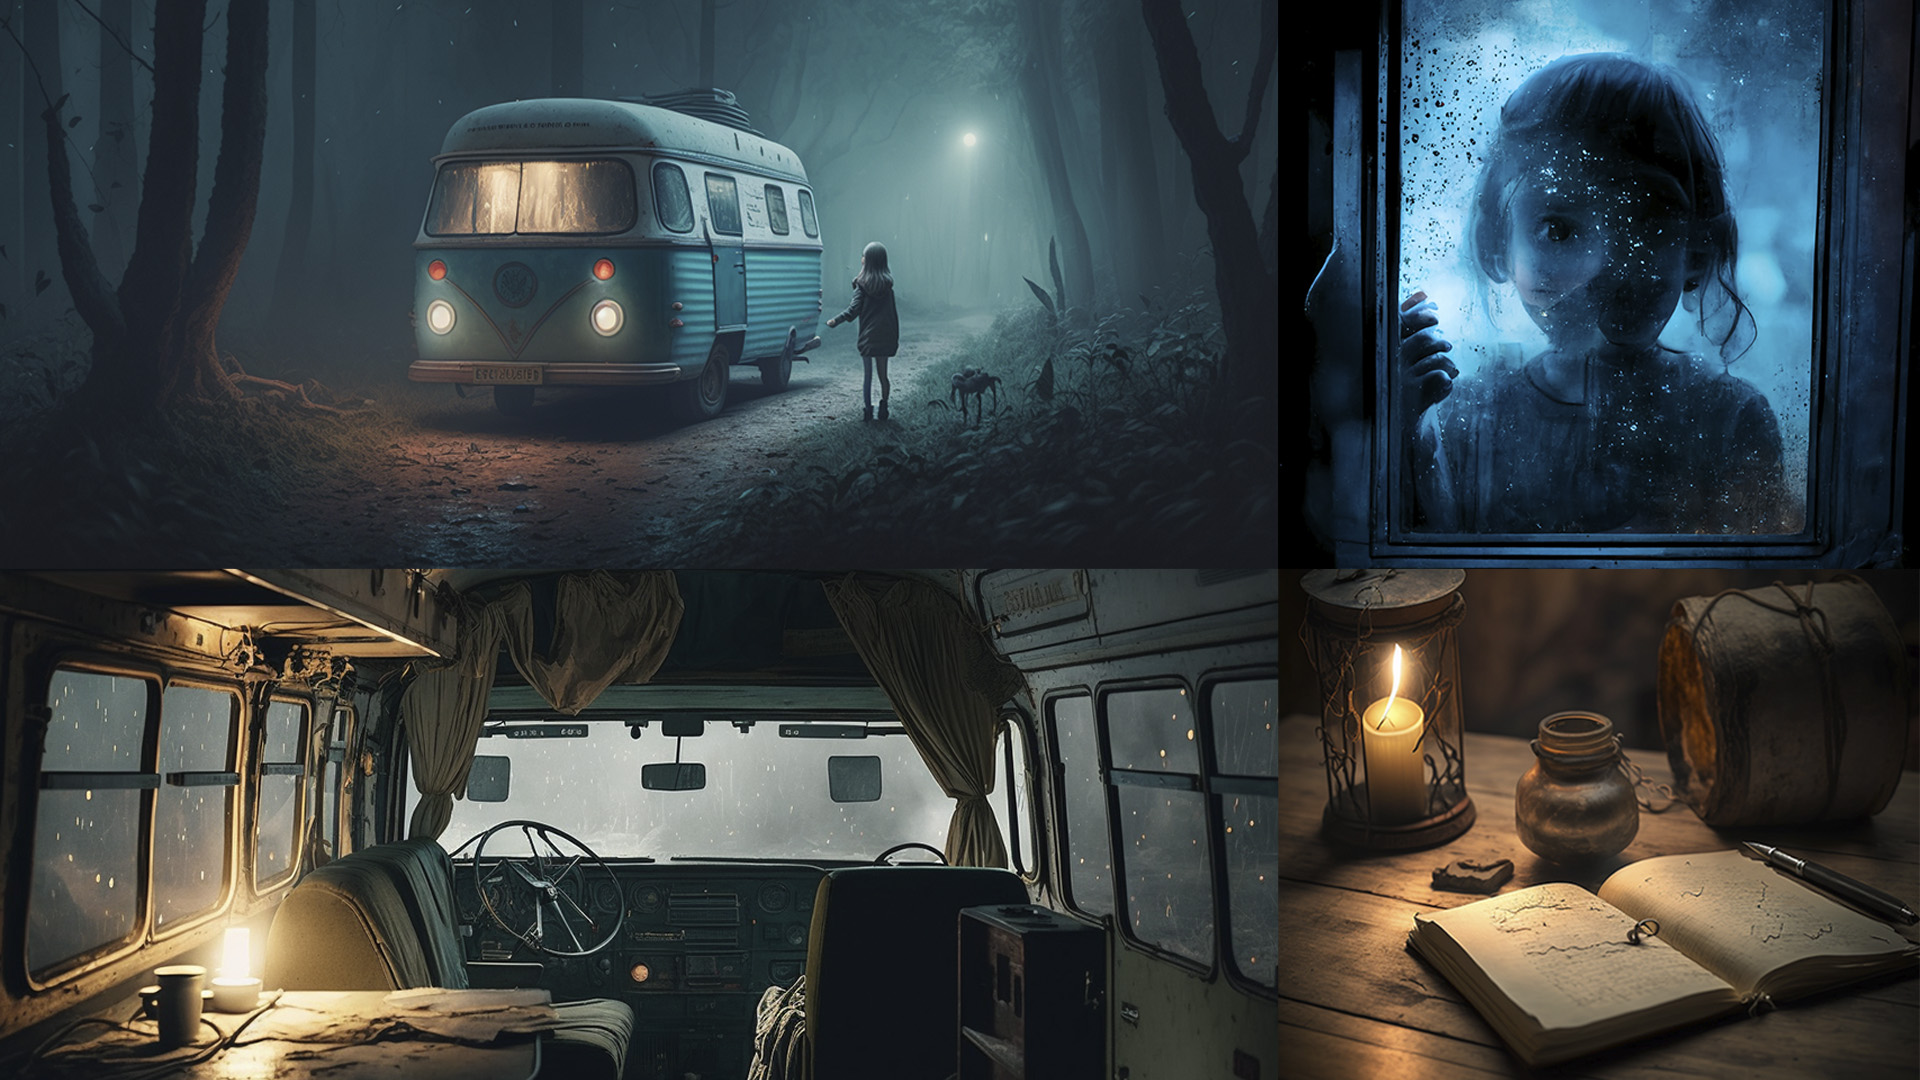 A mood board showing four images: a girl by the van in the woods, the girl leaning out of the misted window of the van, the interior space of the van, an old leather book on the table illuminated by a candle